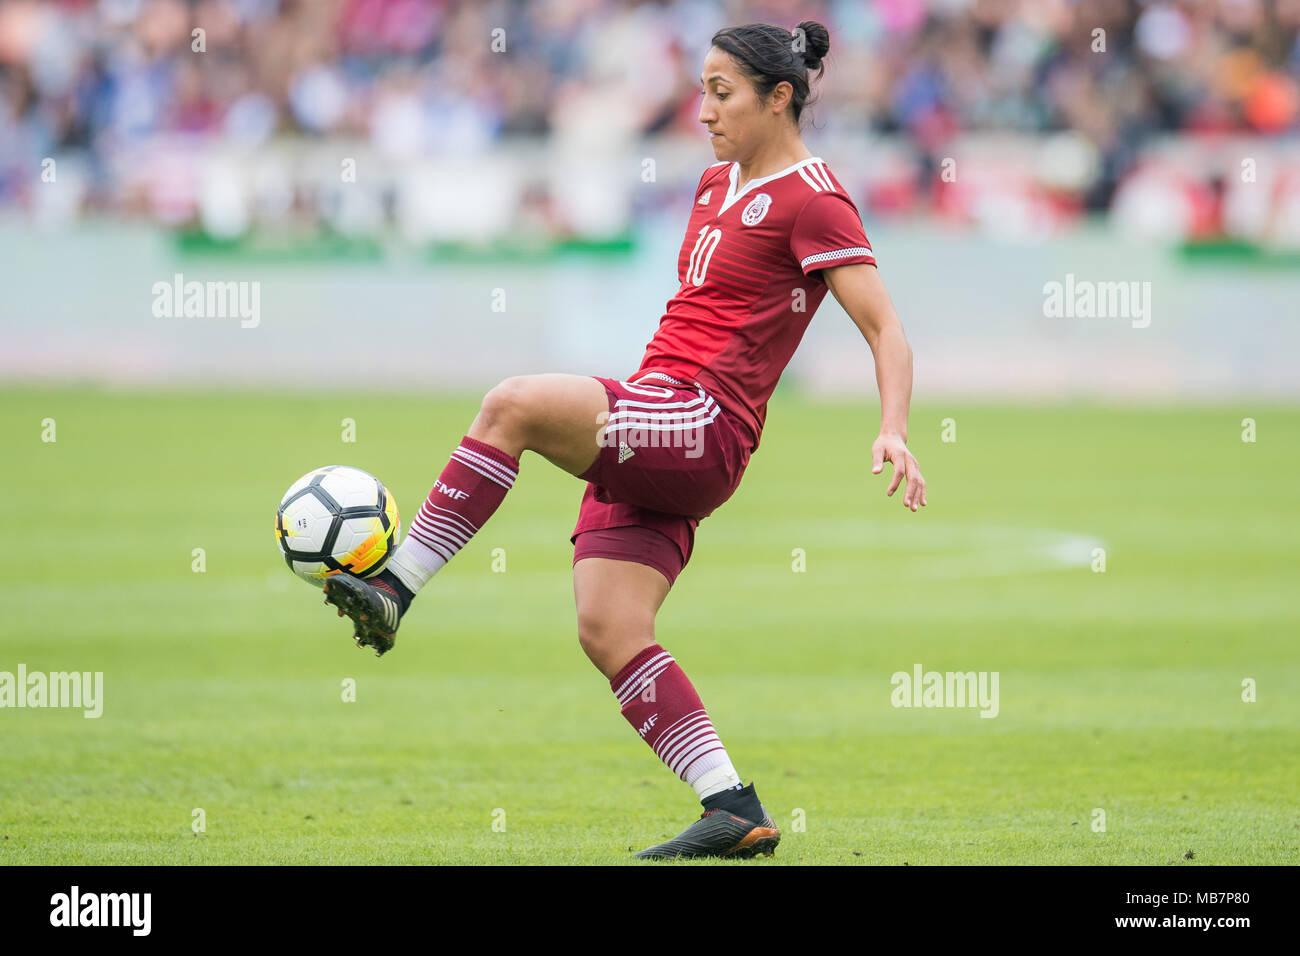 Houston, TX, USA. 8th Apr, 2018. Mexico midfielder Stephany Mayor (10) controls the ball during an international soccer friendly match between Mexico and USA at BBVA Compass Stadium in Houston, TX. USA won the match 6-2.Trask Smith/CSM/Alamy Live News Stock Photo